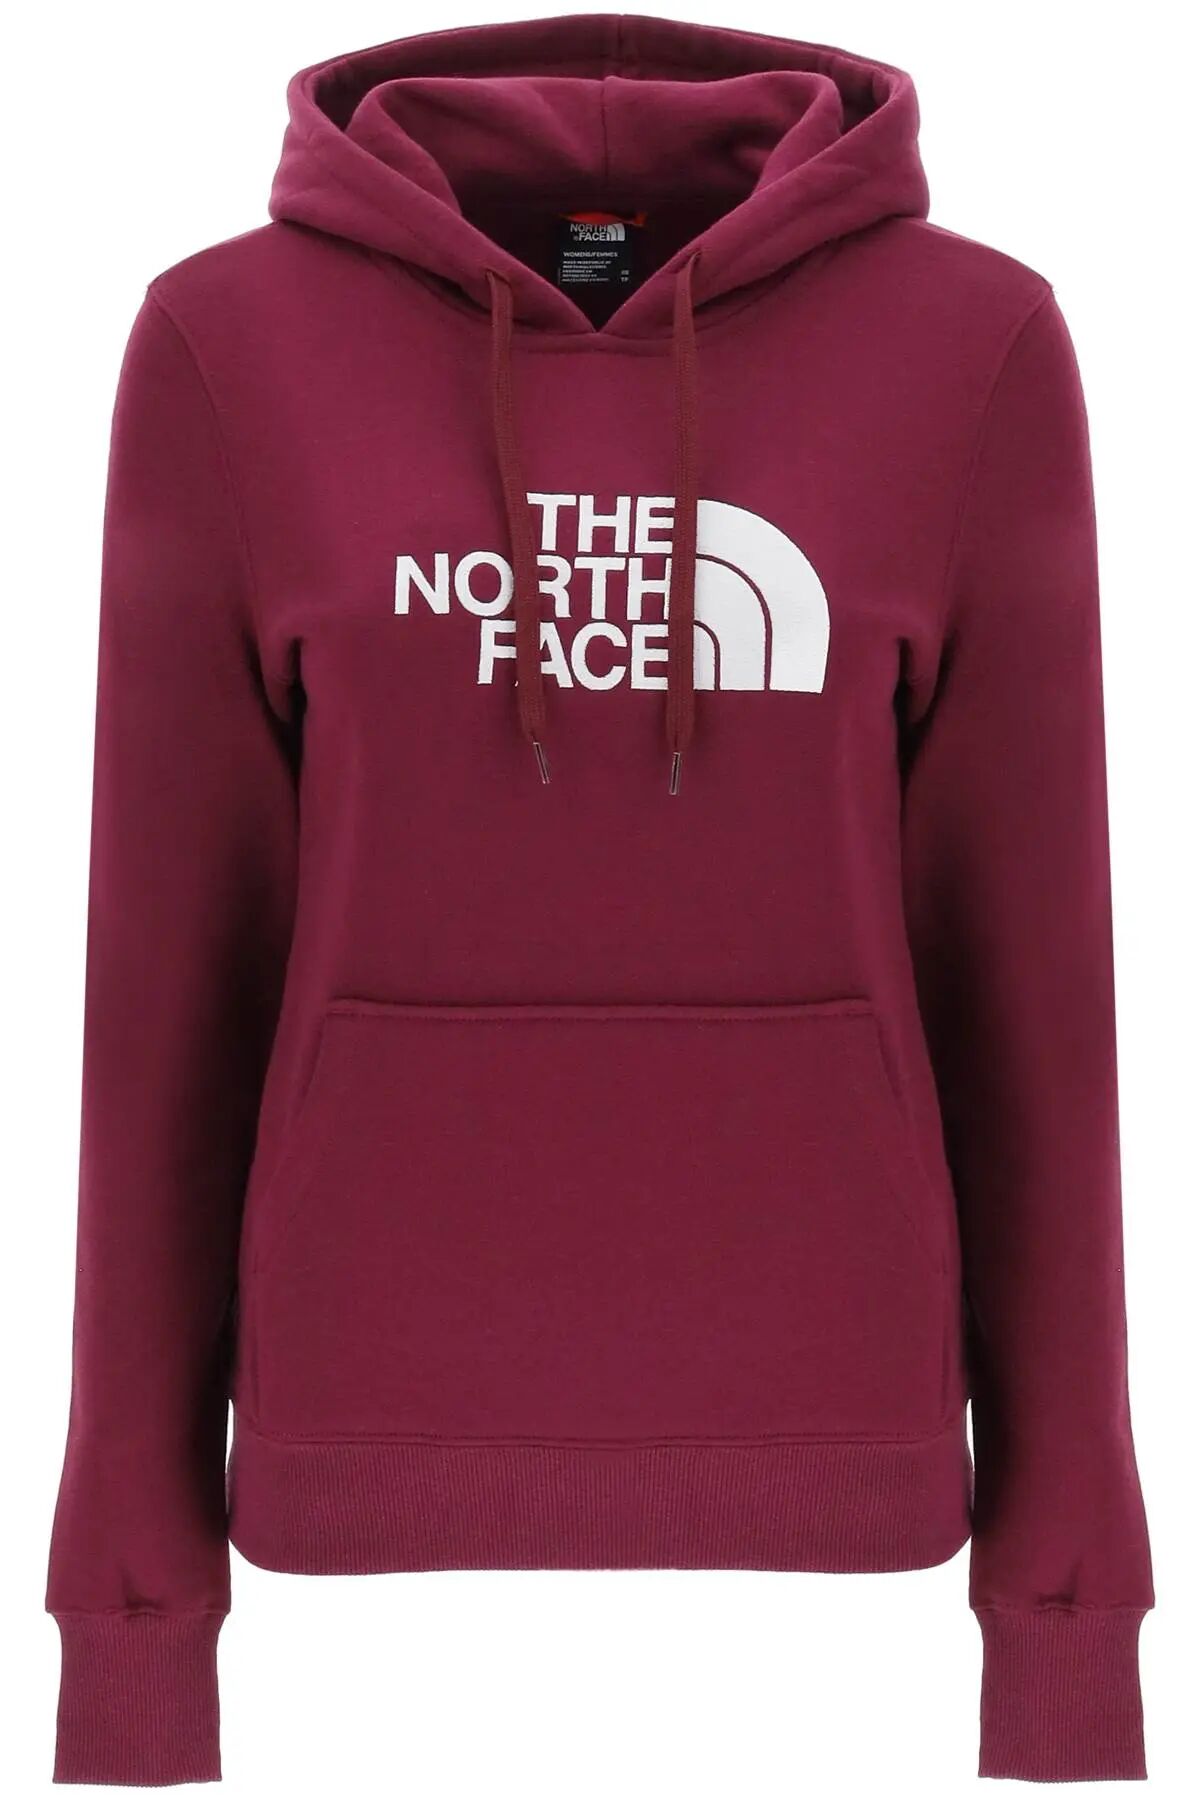 THE NORTH FACE 'Drew Peak' hoodie with logo embroidery  - Red,Purple - female - Size: Small